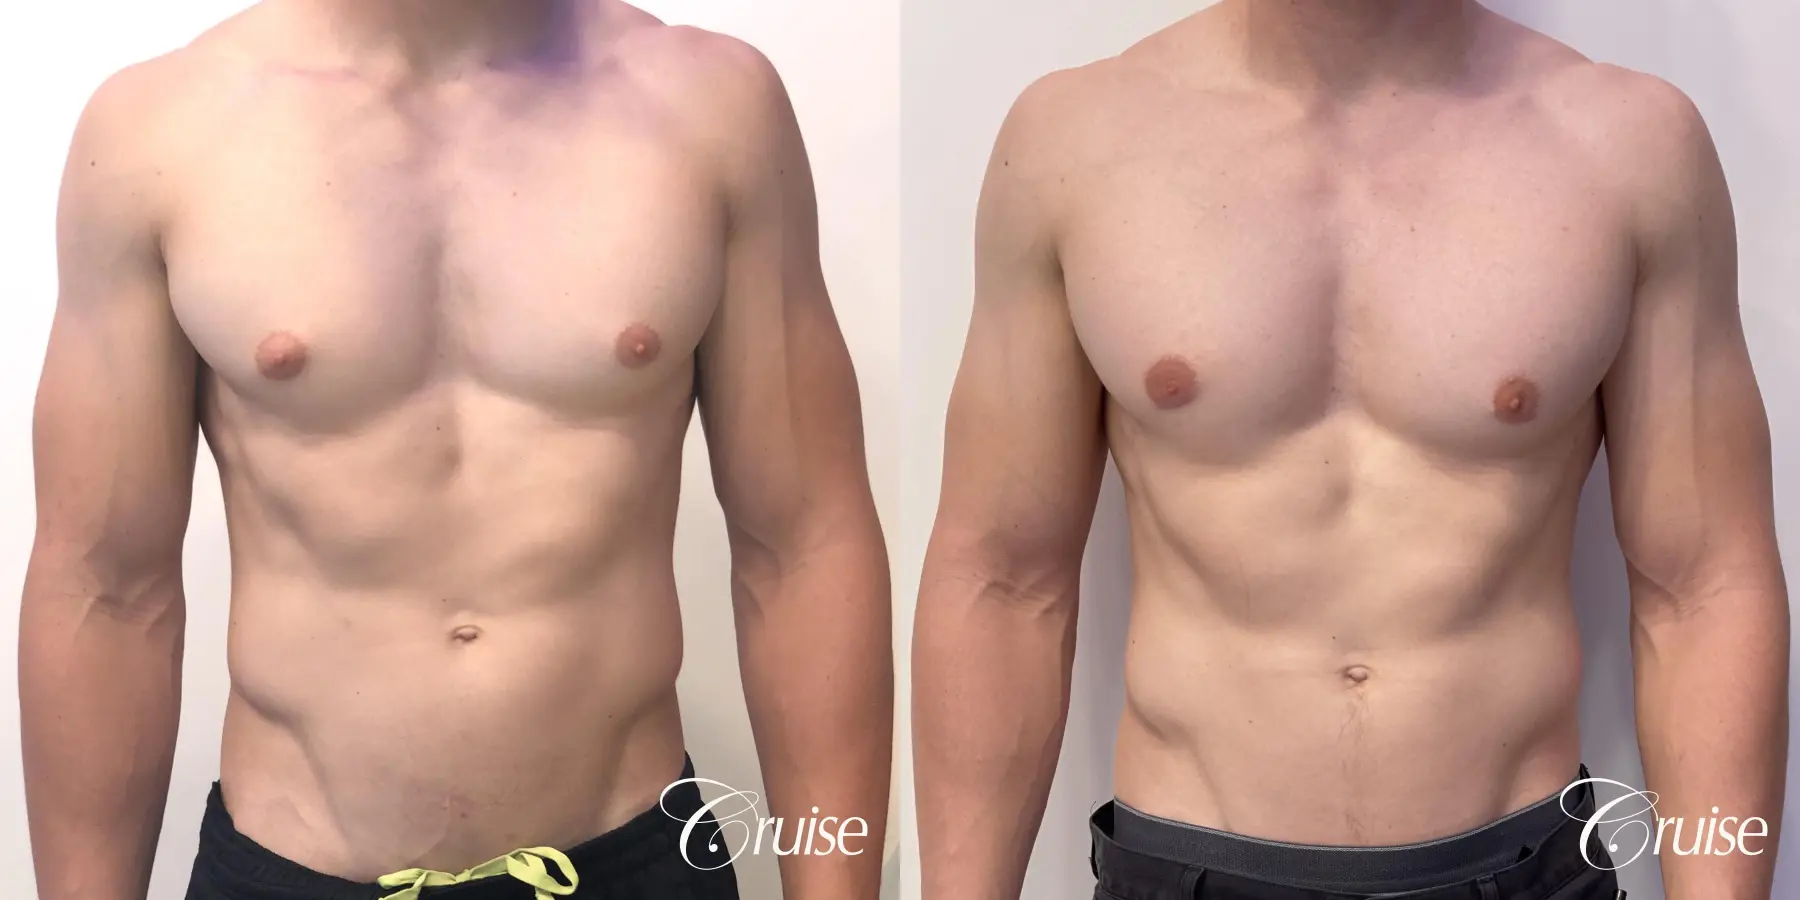 gynecomastia with puffy nipples - Before and After 1